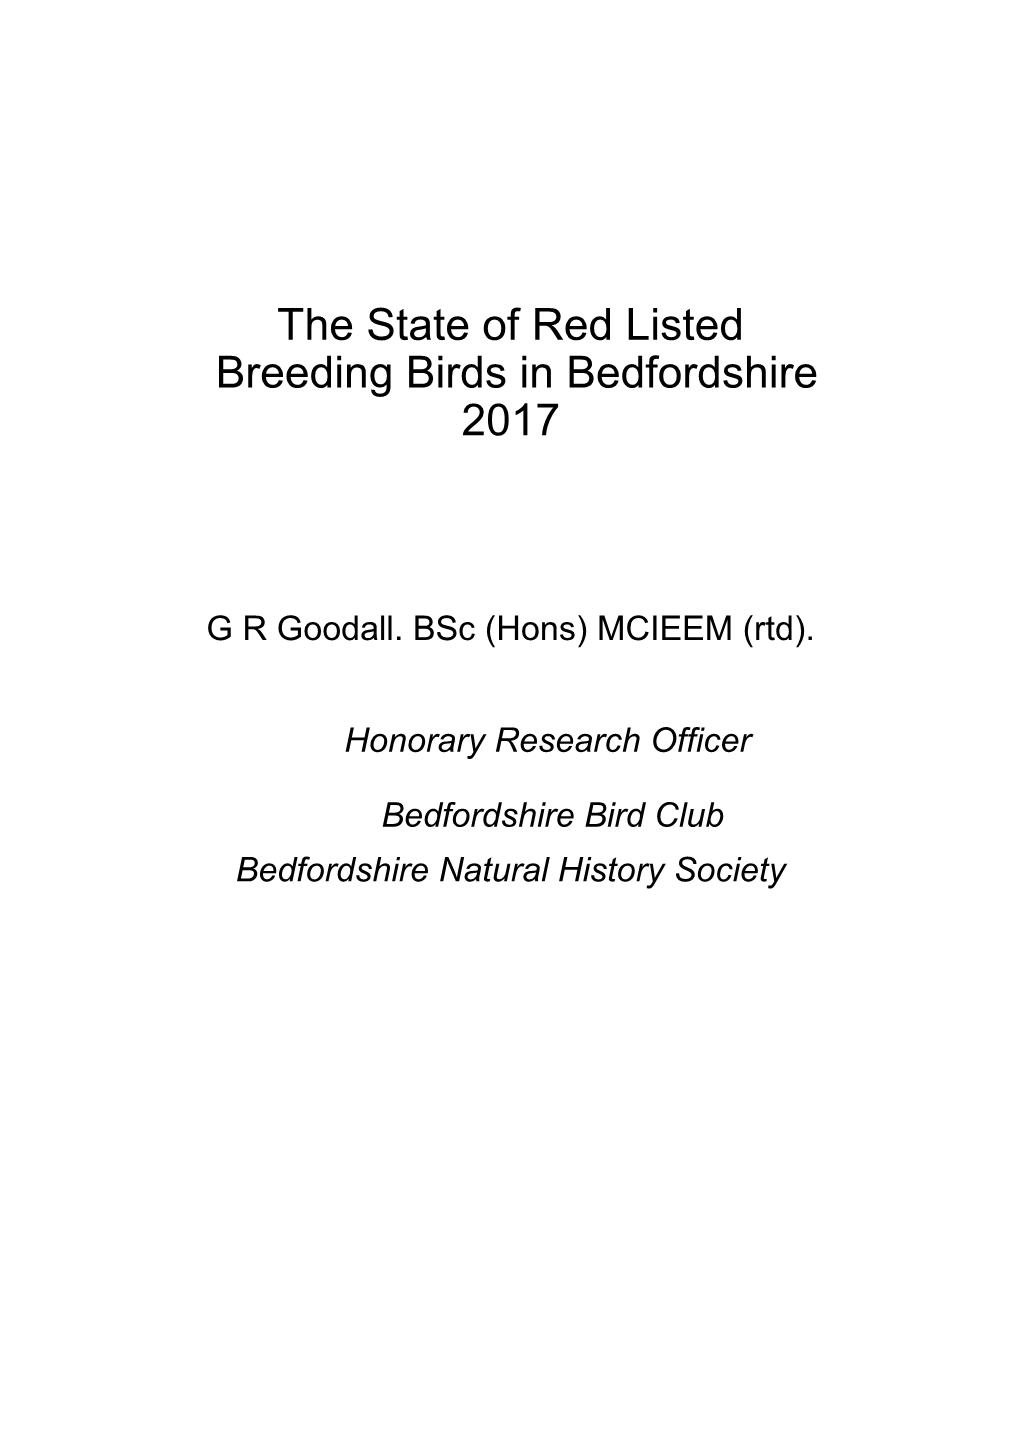 The State of Red Listed Breeding Birds in Bedfordshire 2017